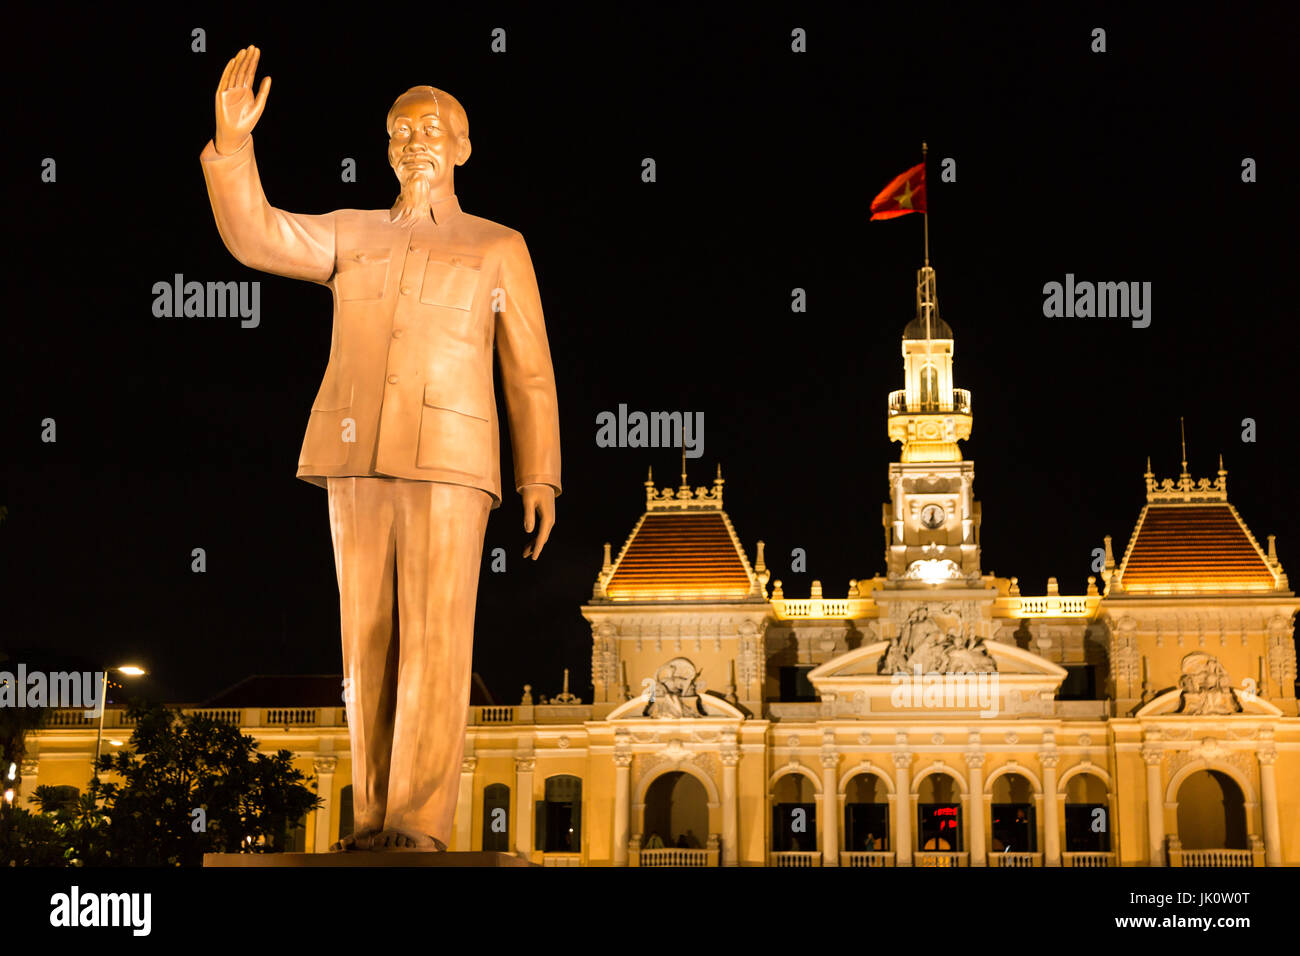 Bronze statue of President Ho Chi Minh in front of City Hall - Ho Chi Minh City, Vietnam - March 2017 Stock Photo